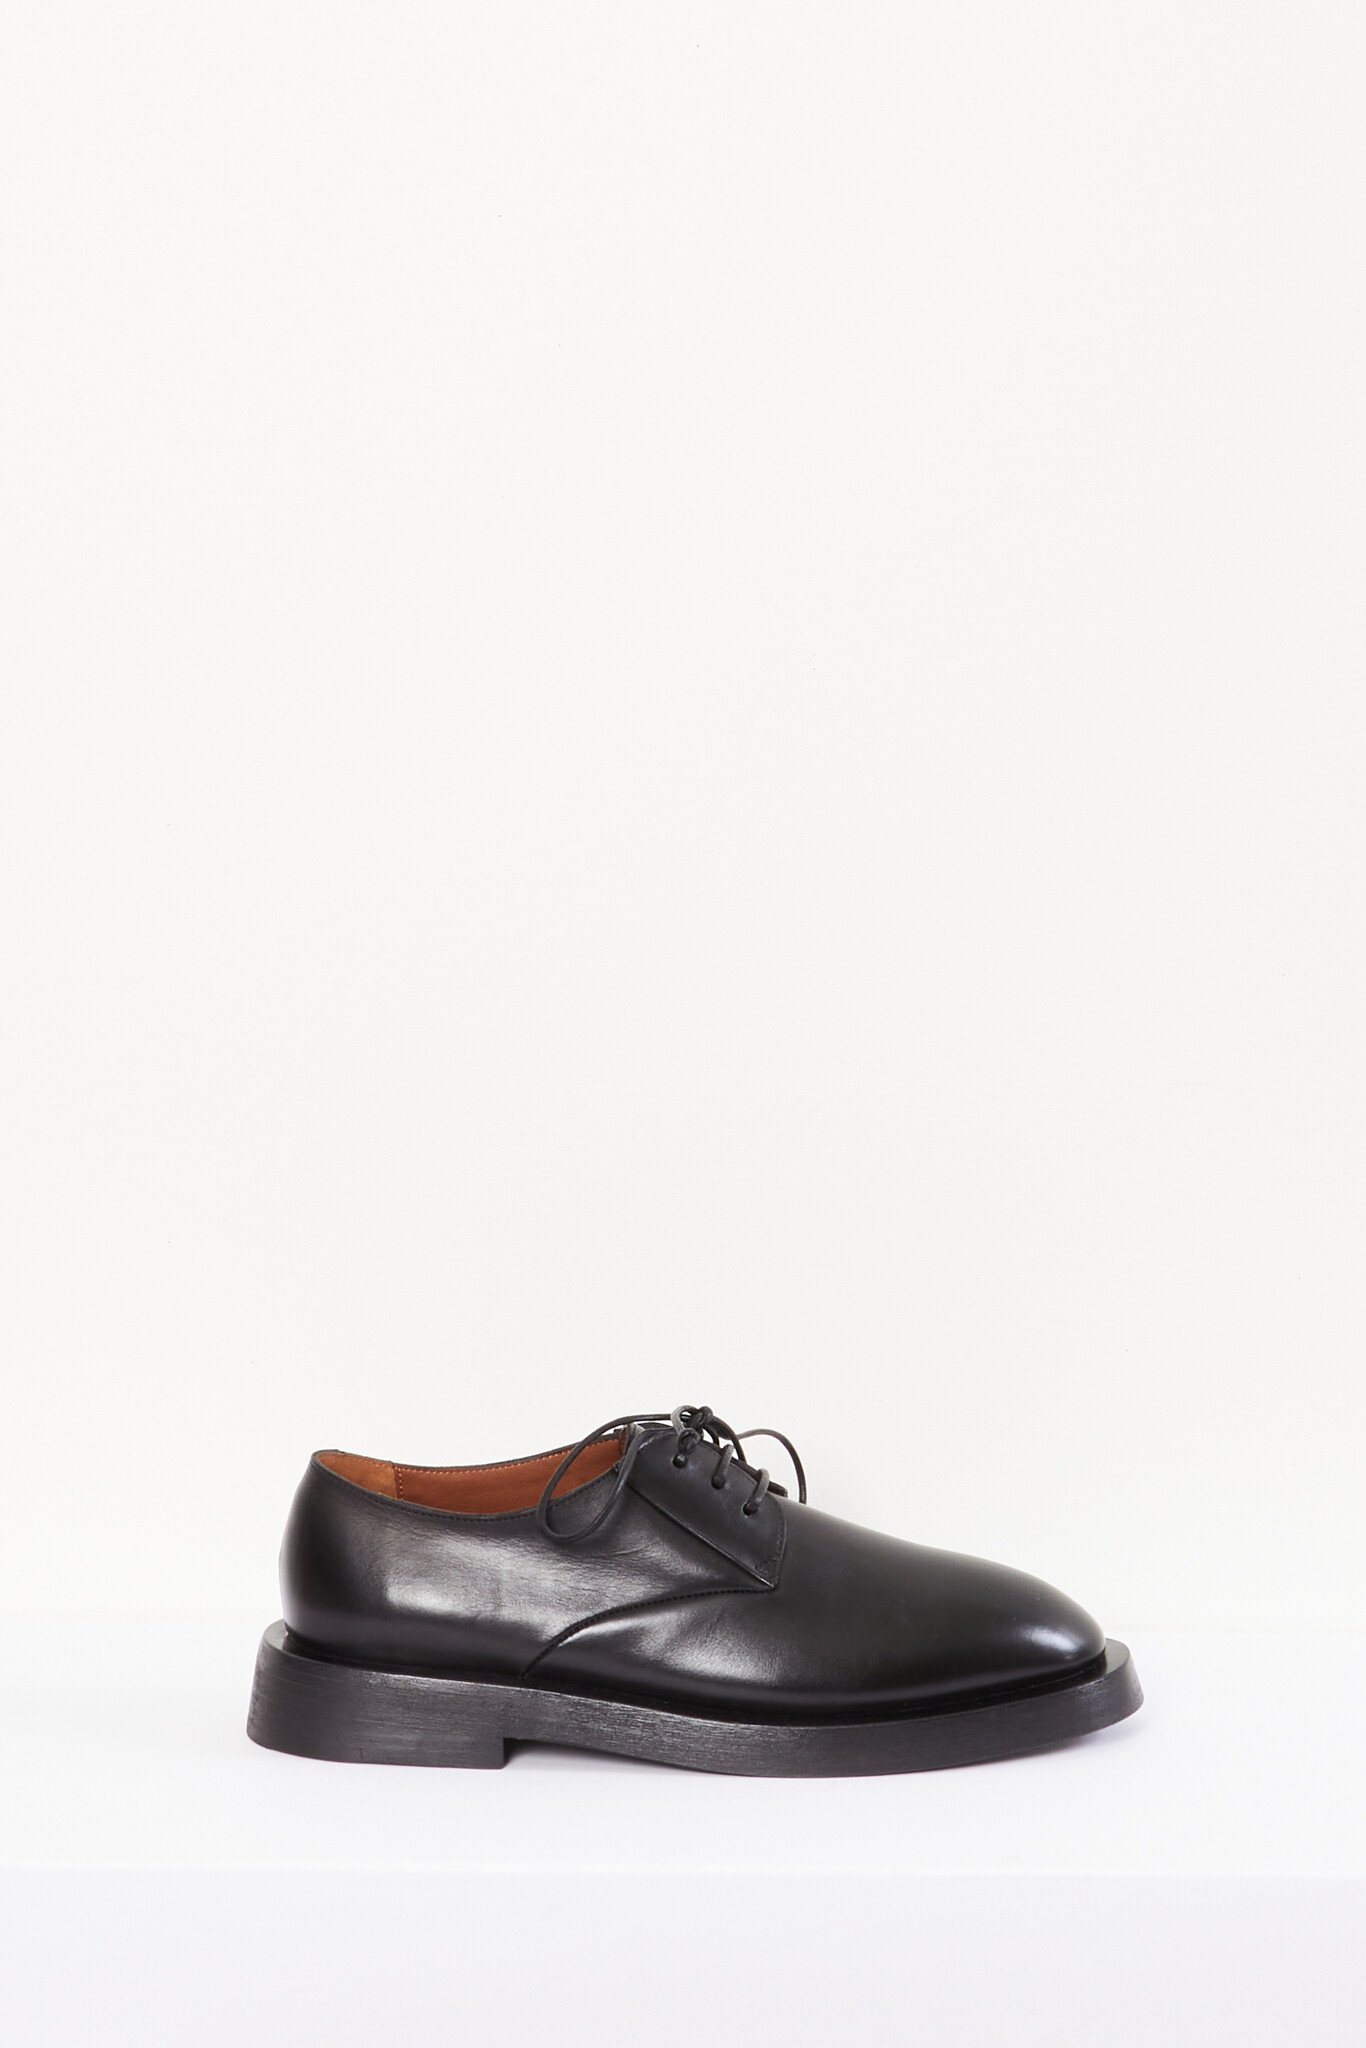 Marsell Mentone lace ups